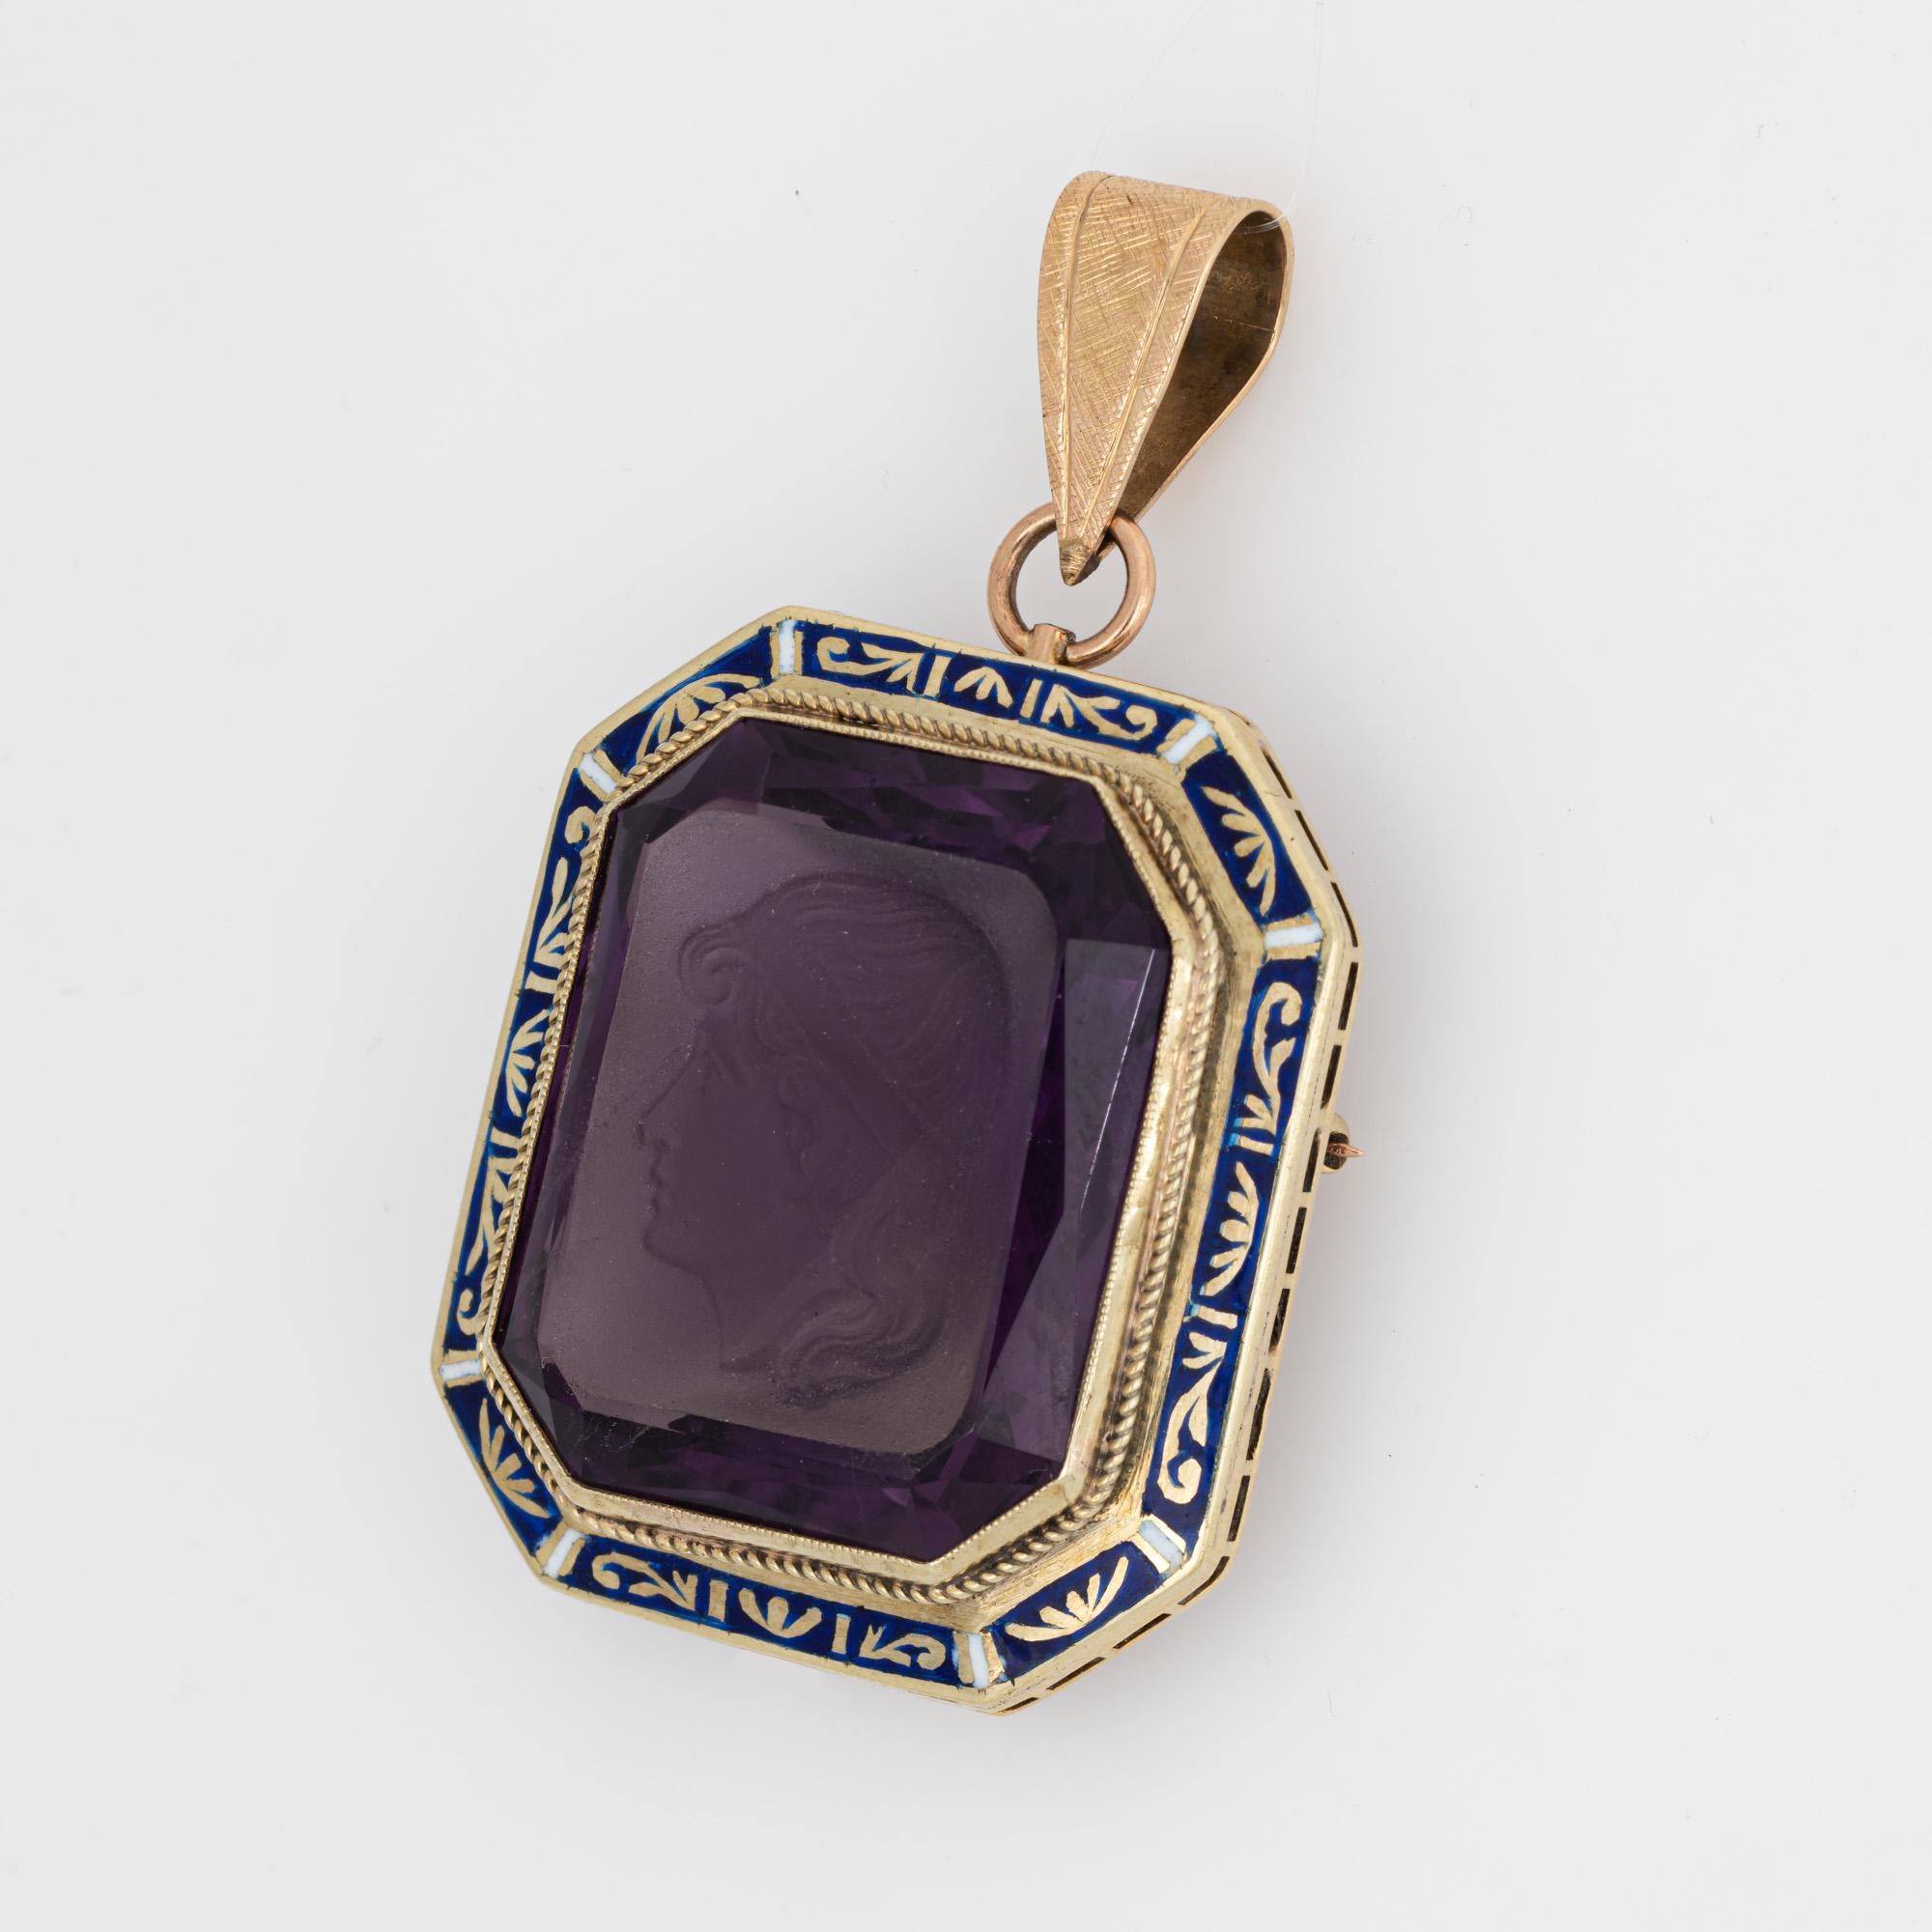 
Finely detailed vintage Art Deco era amethyst intaglio pendant crafted in 14k yellow gold (circa 1920s to 1930s).  

Carved amethyst intaglio measures 26mm x 21mm. The amethyst is in very good condition and free of cracks or chips. 

The distinct